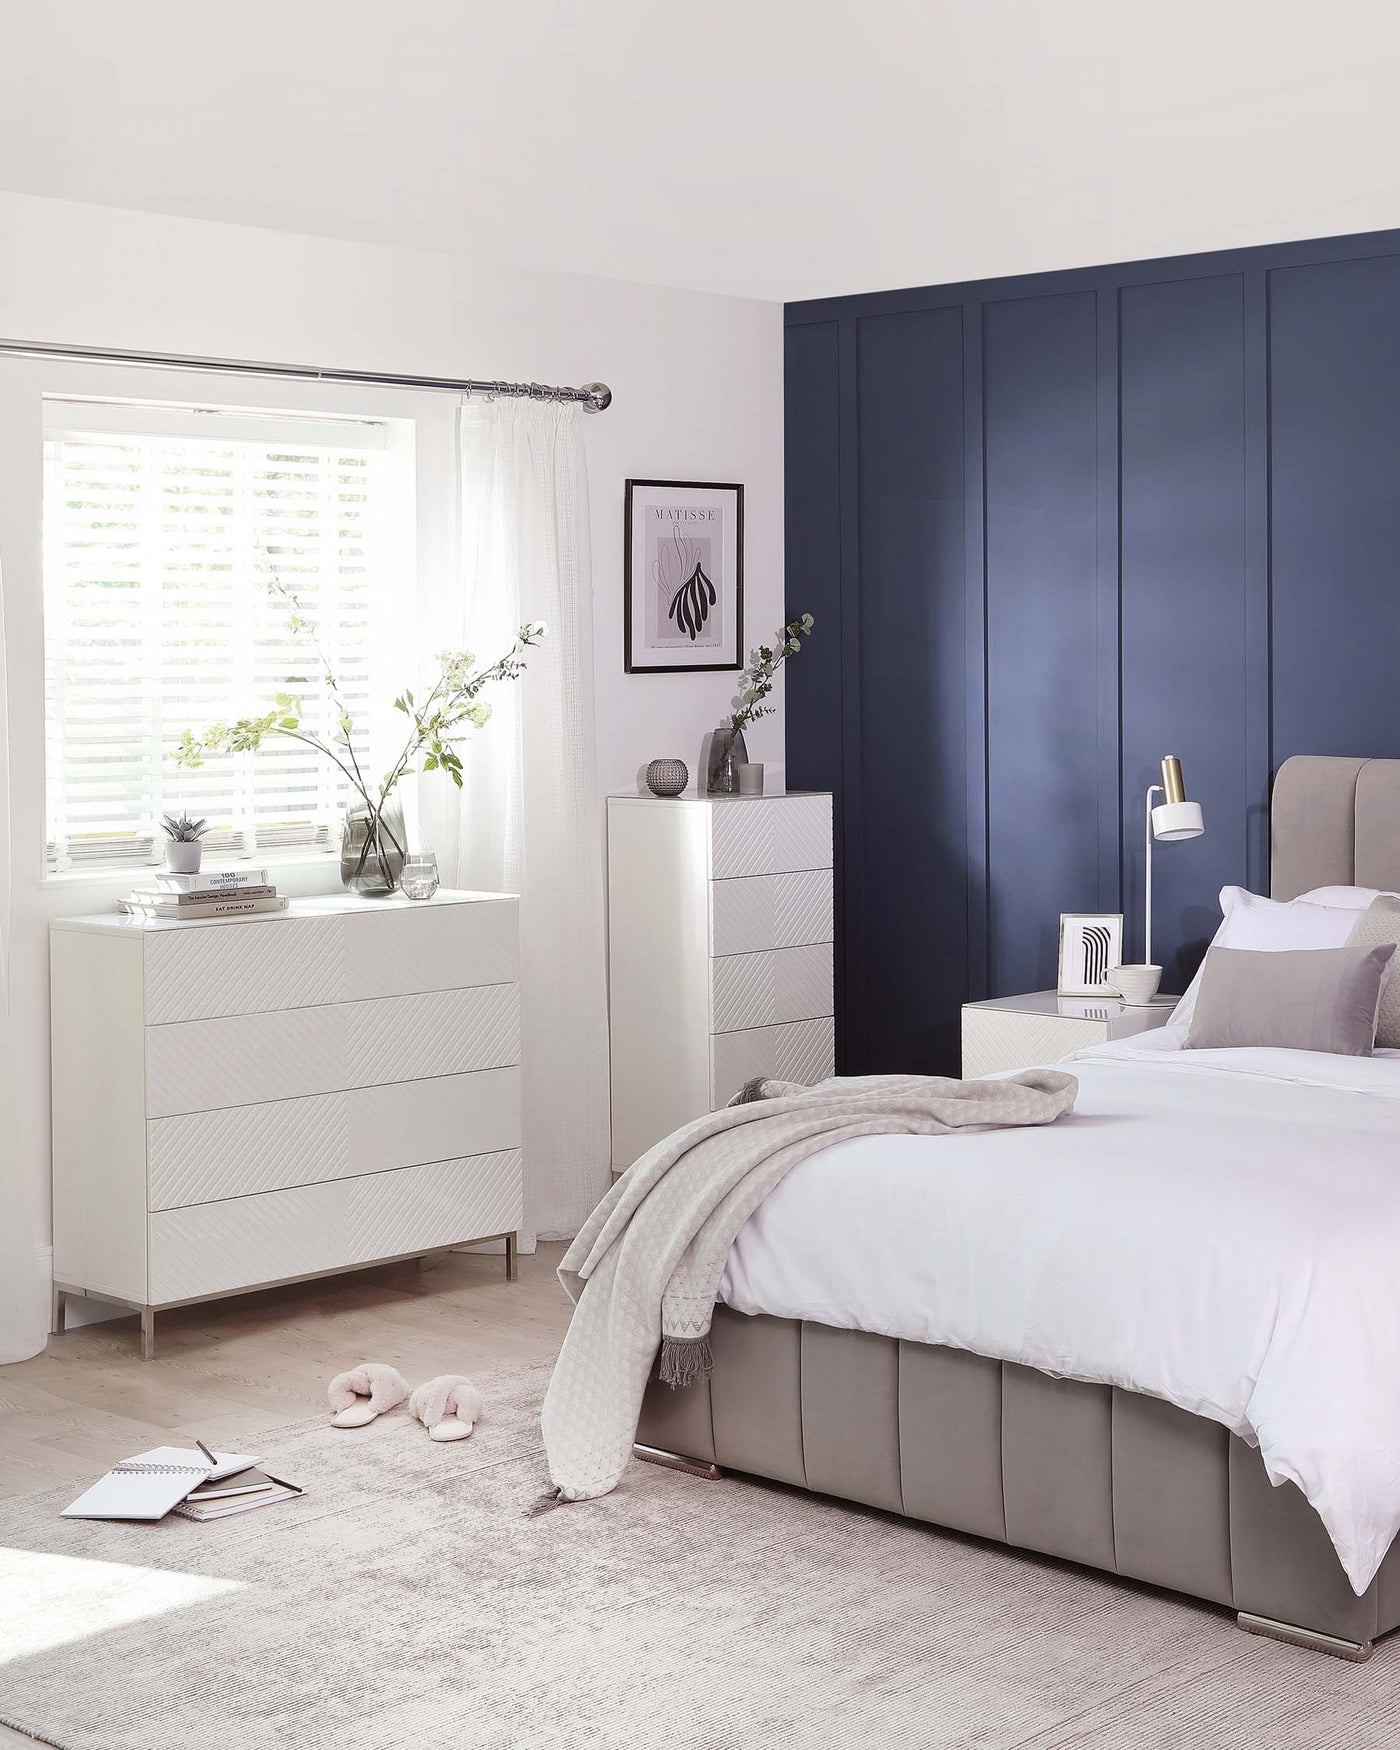 Modern bedroom furniture including a grey upholstered bed with a high headboard, a white textured dresser, and a matching bedside table. The dresser and bedside table have a geometric carved design and metal accents.